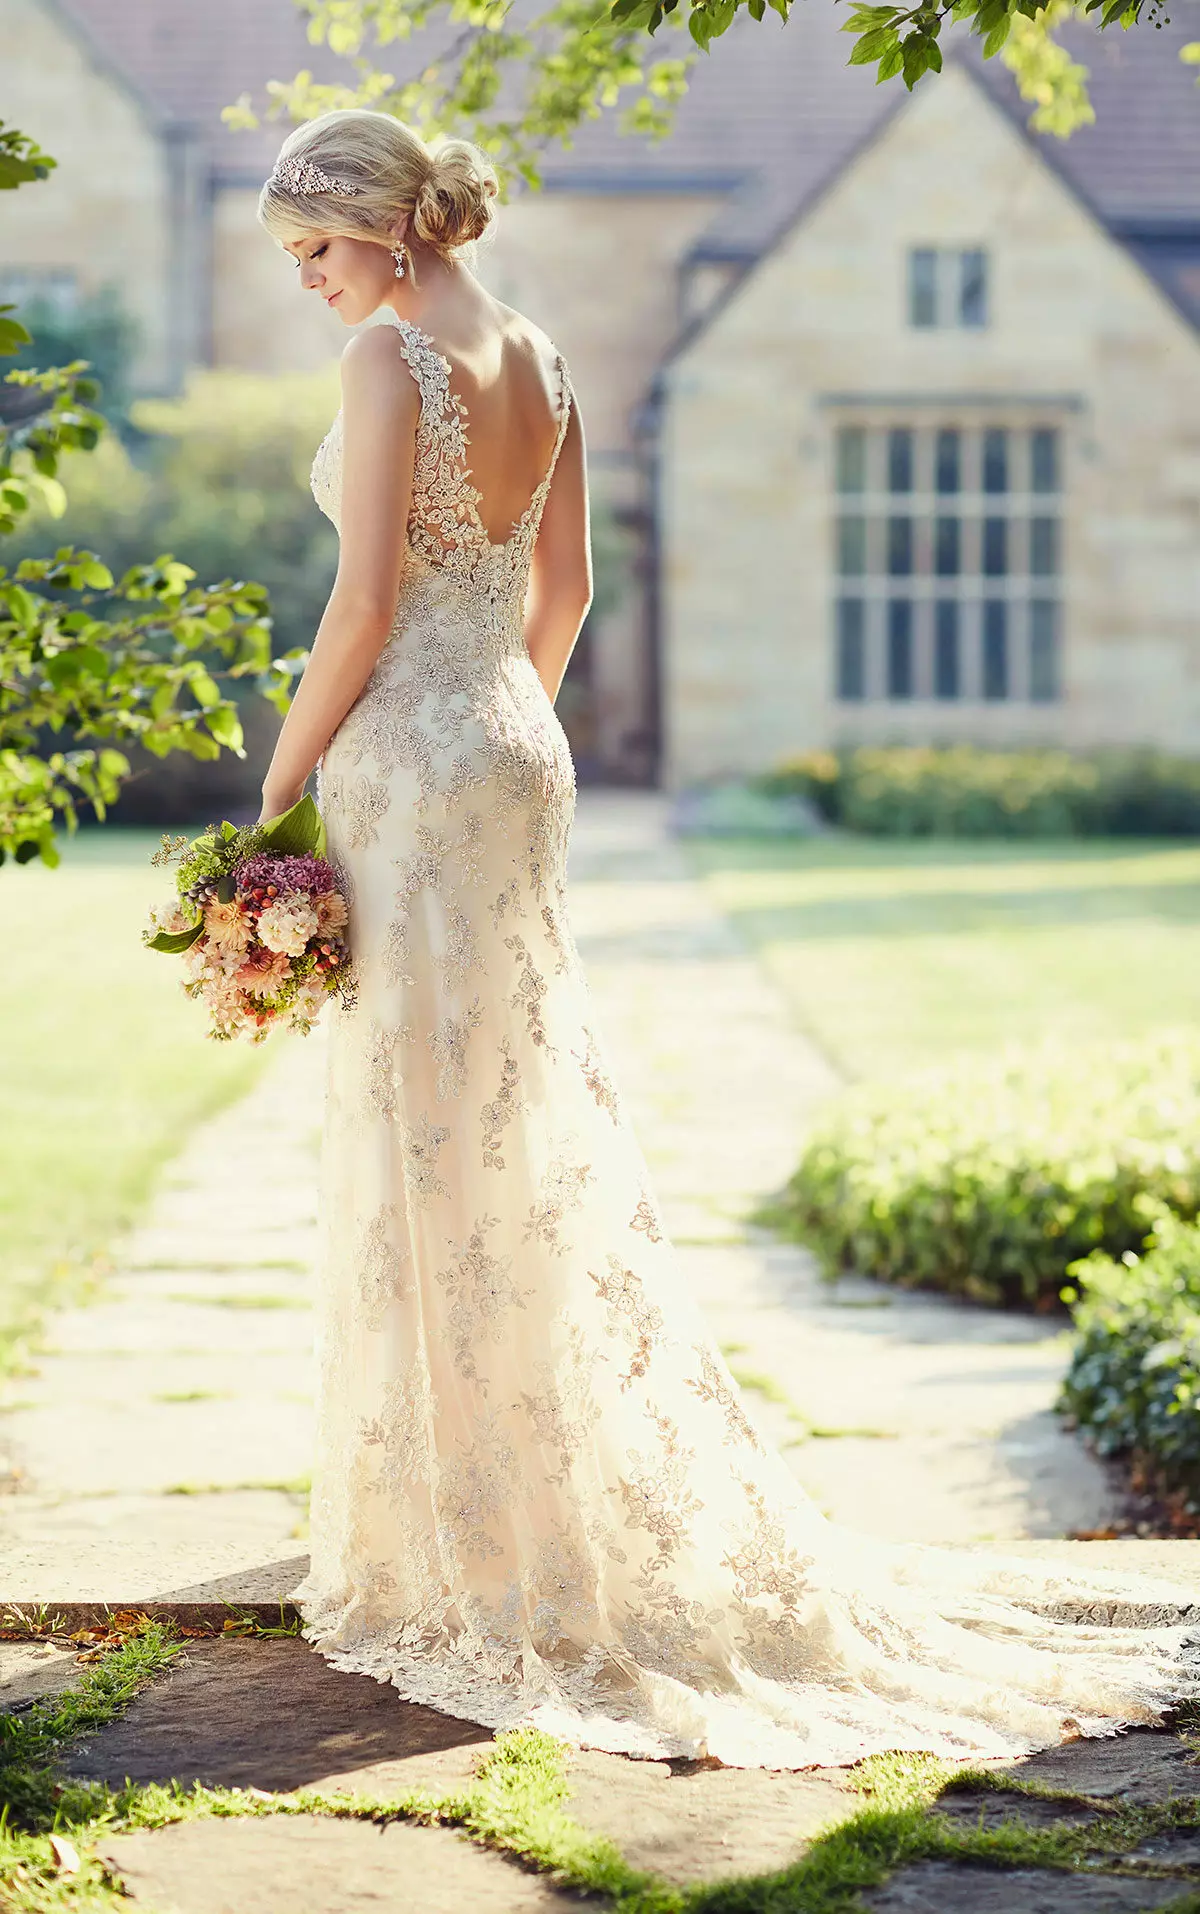 Lace Wedding Dress with Pin